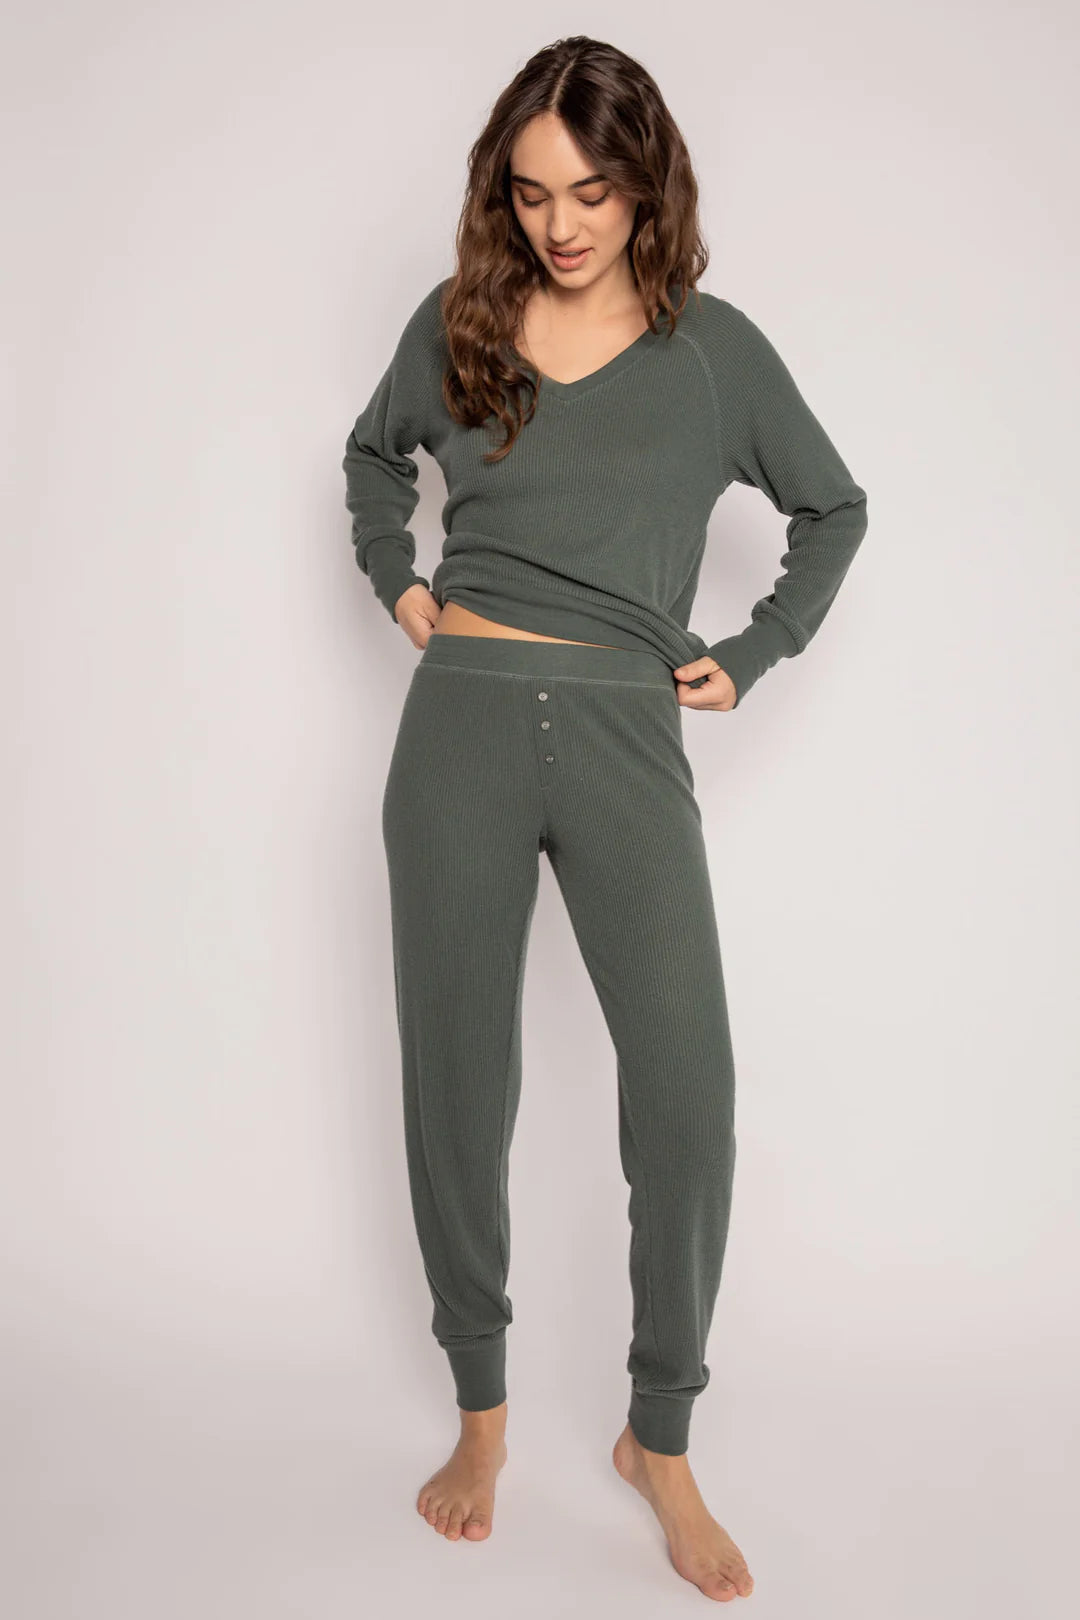 Best Loungewear Sets for Women That Are Super Cozy for Downtime